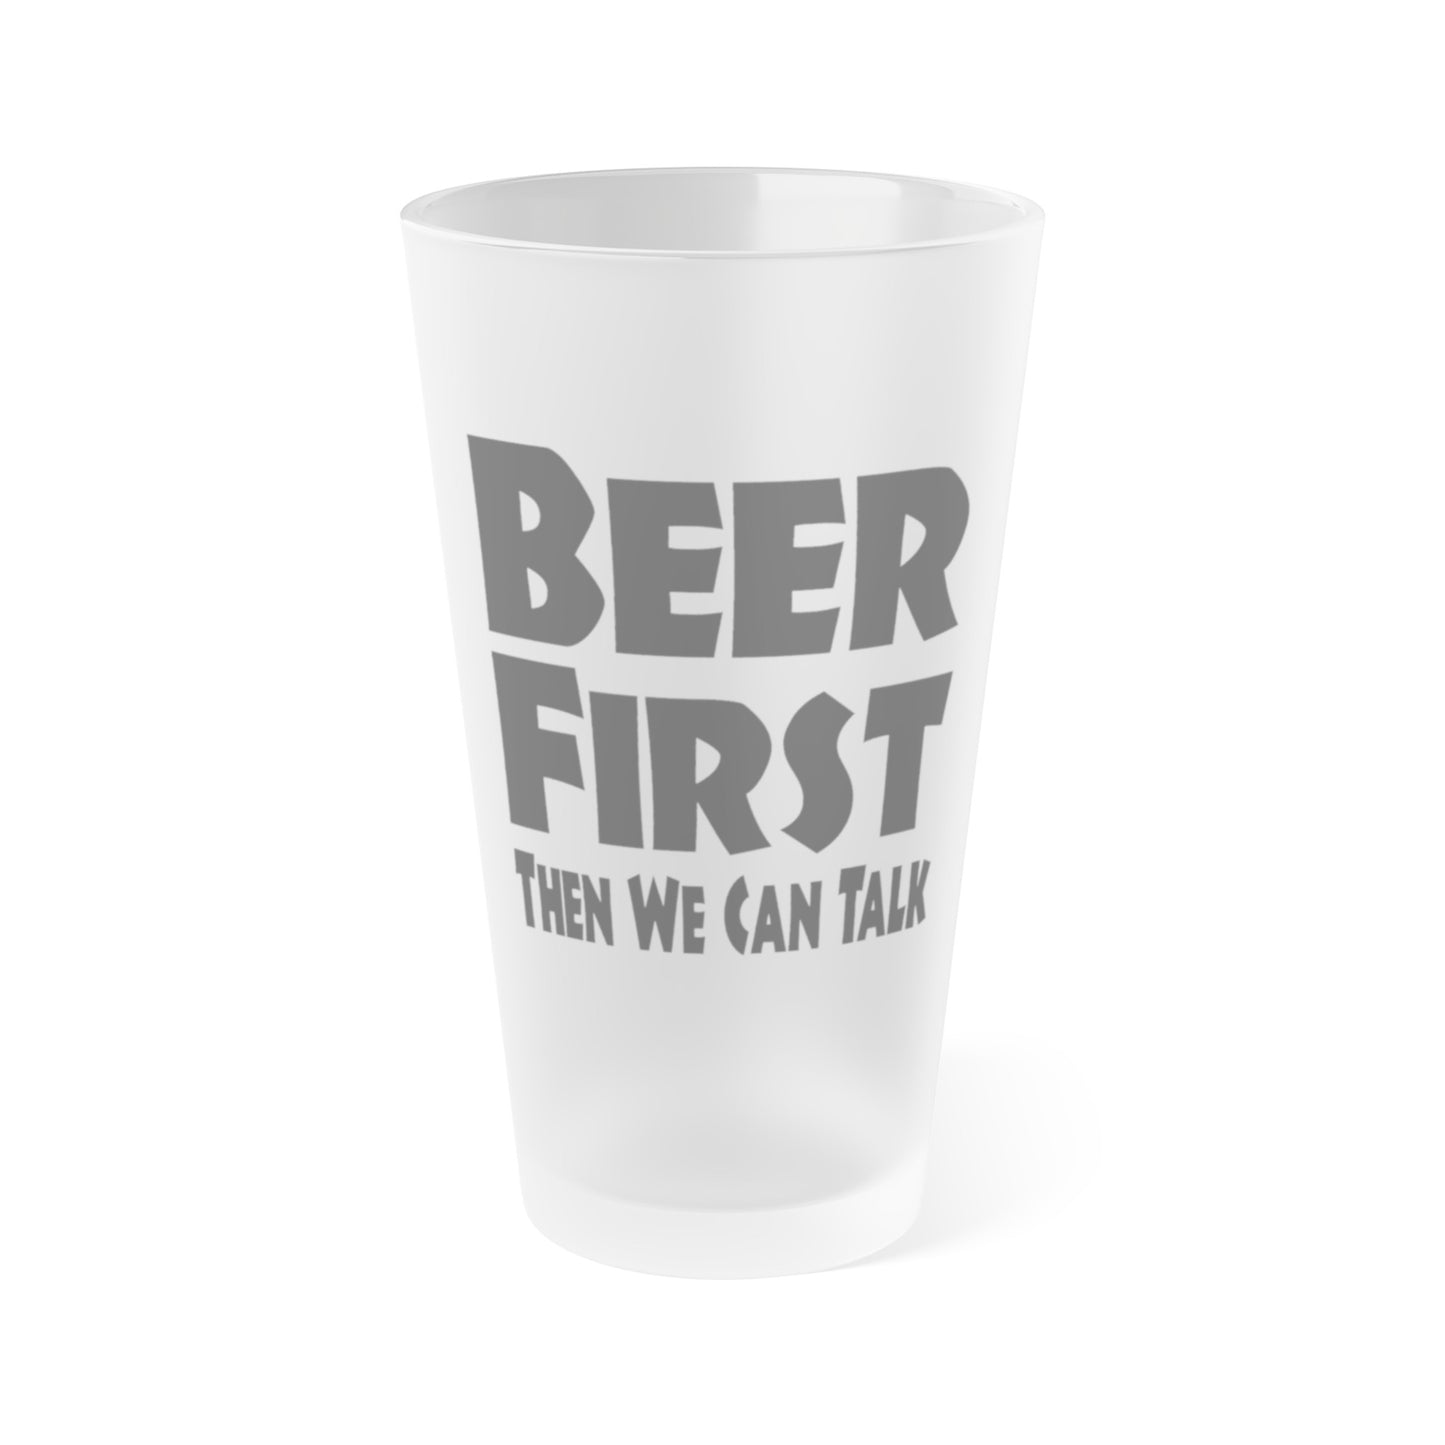 BEER FIRST, Then We Can Talk - Frosted Pint Glass, 16oz